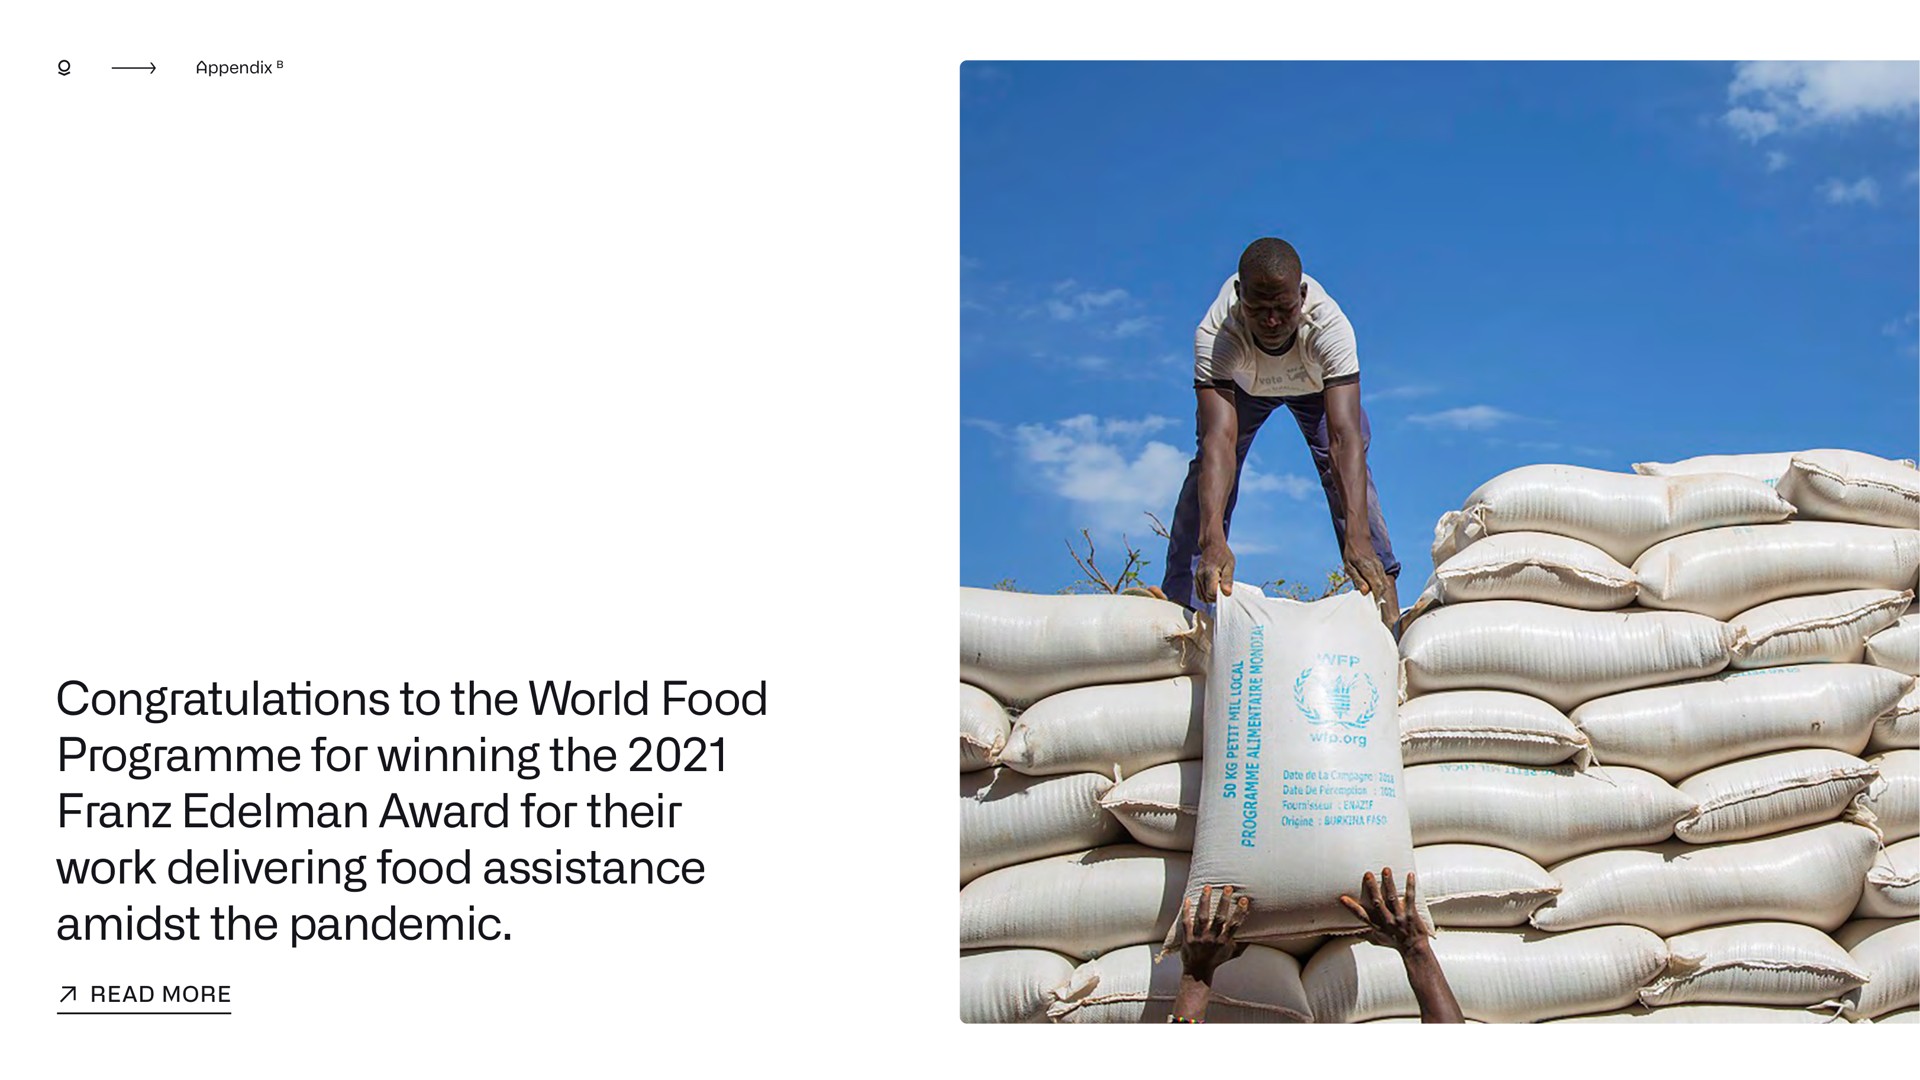 congratulations to the world food for winning the award for their work delivering food assistance amidst the pandemic | Palantir